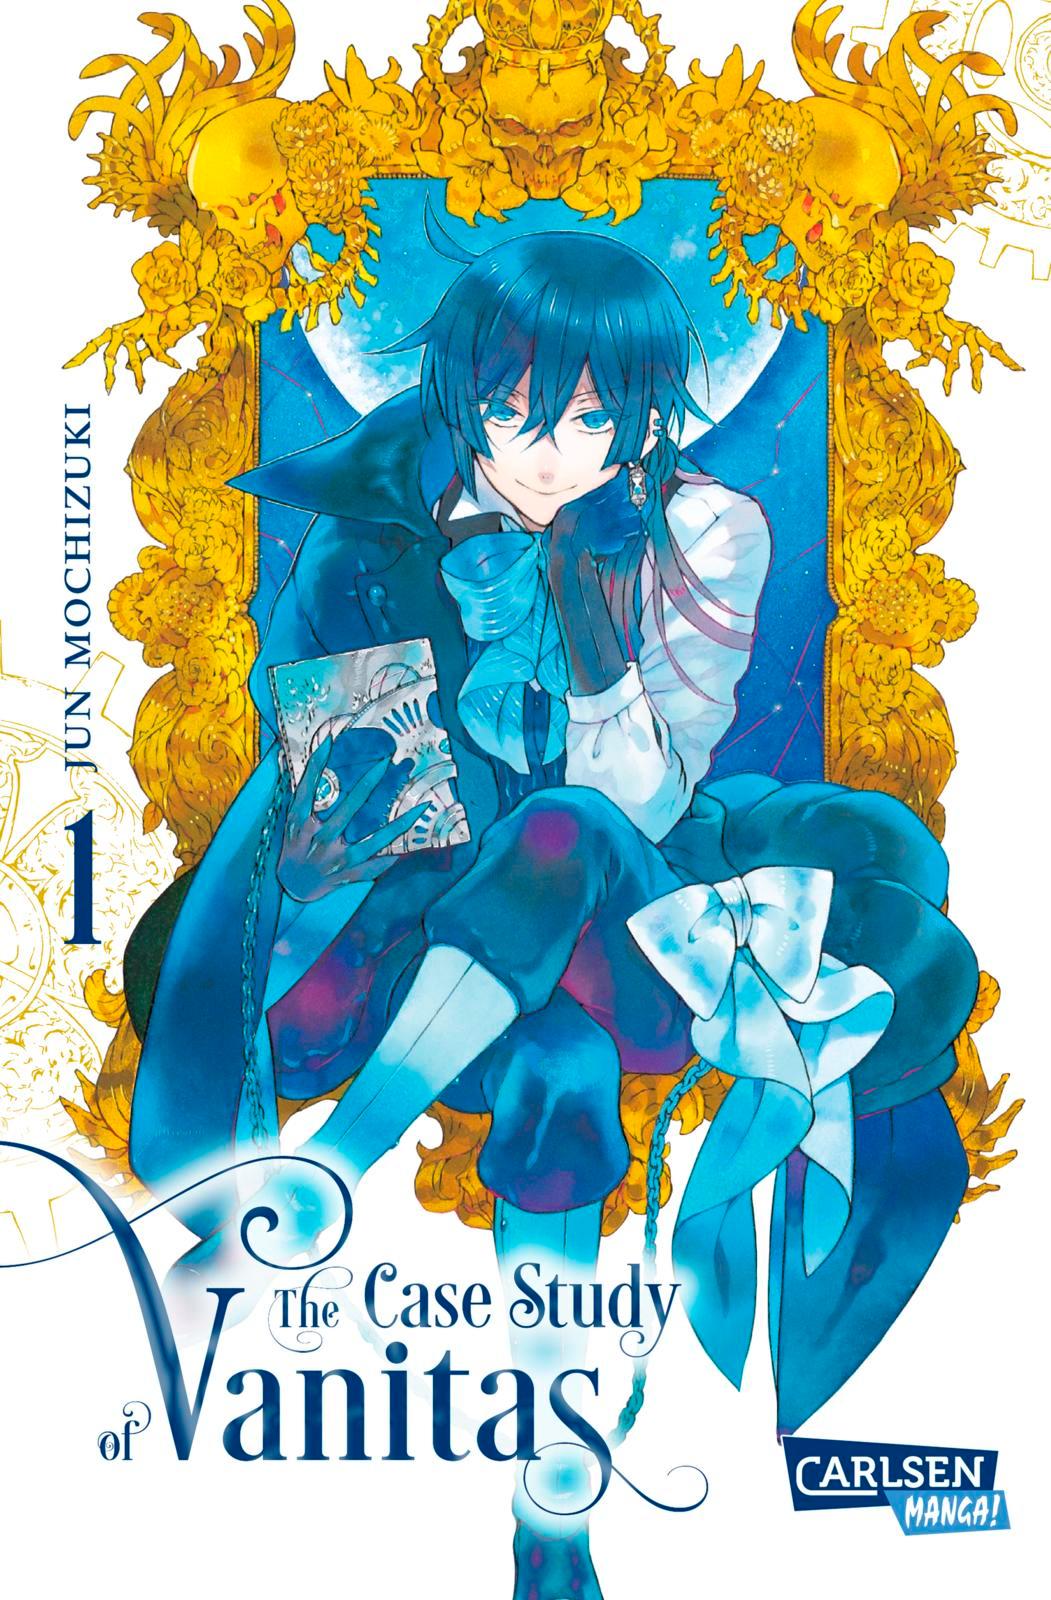 how does the case study of vanitas end